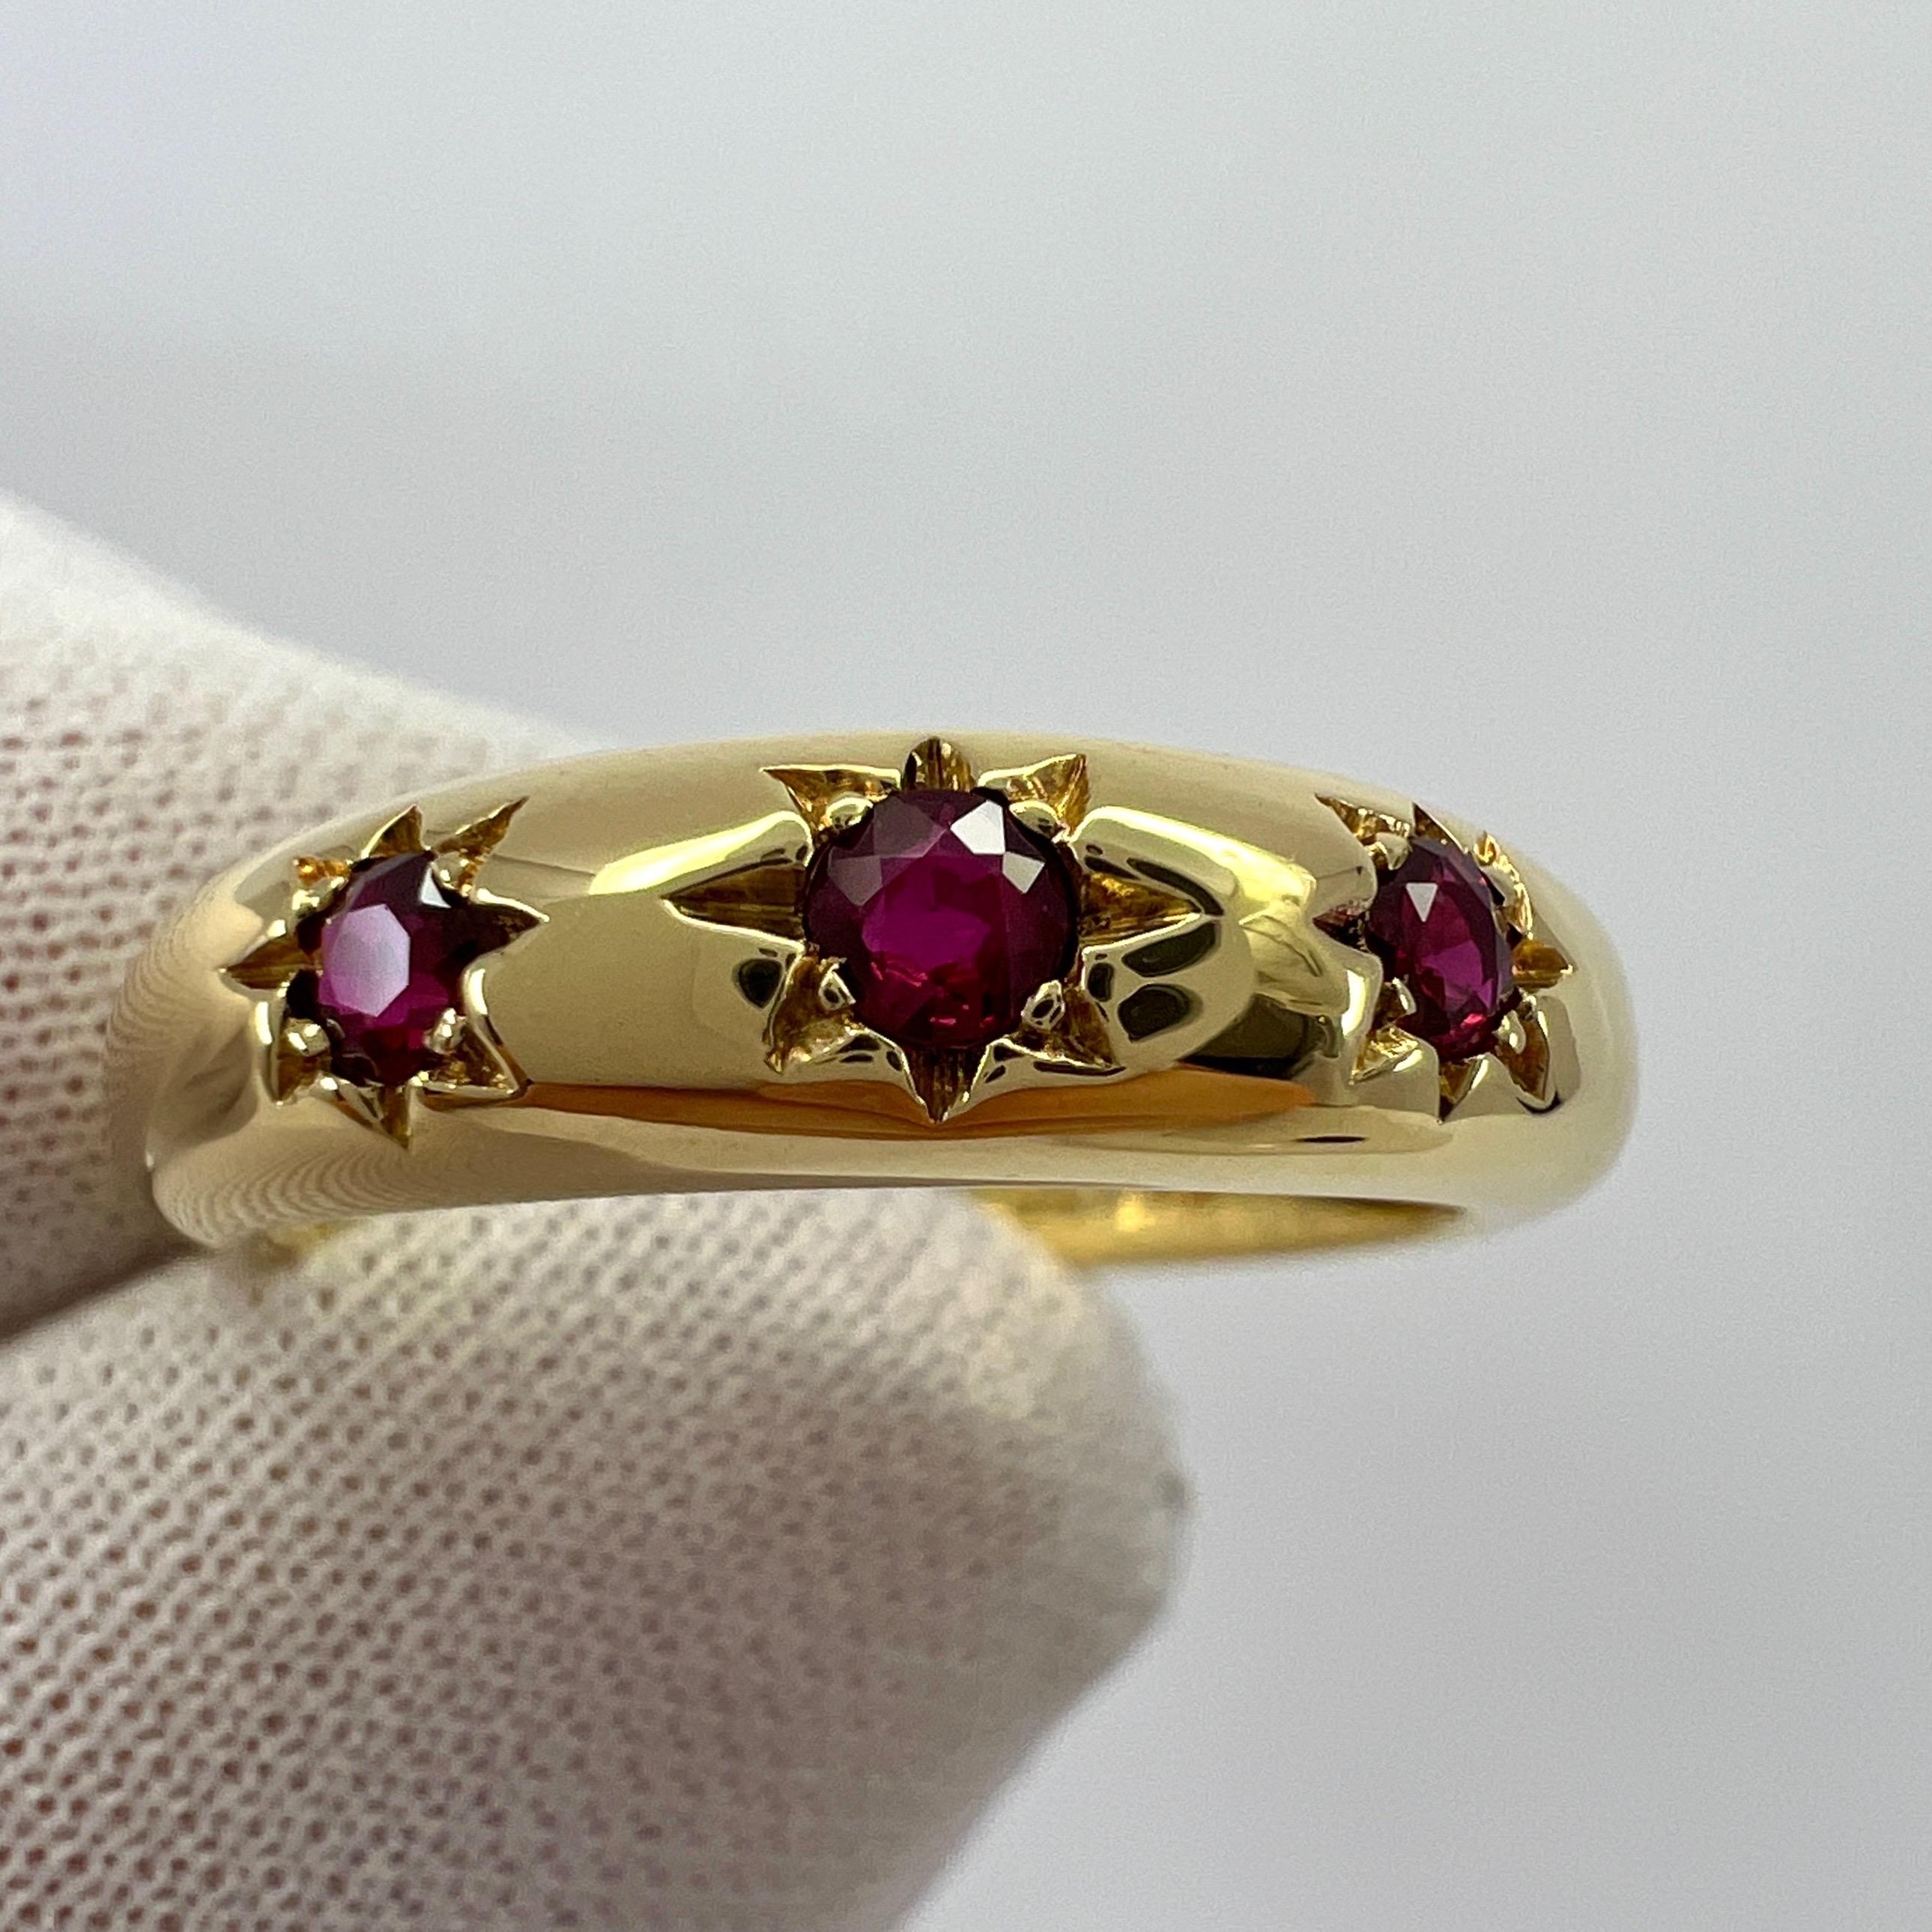 Rare Vintage Van Cleef & Arpels Star Set Ruby 18k Yellow Gold Three Stone Ring For Sale 7